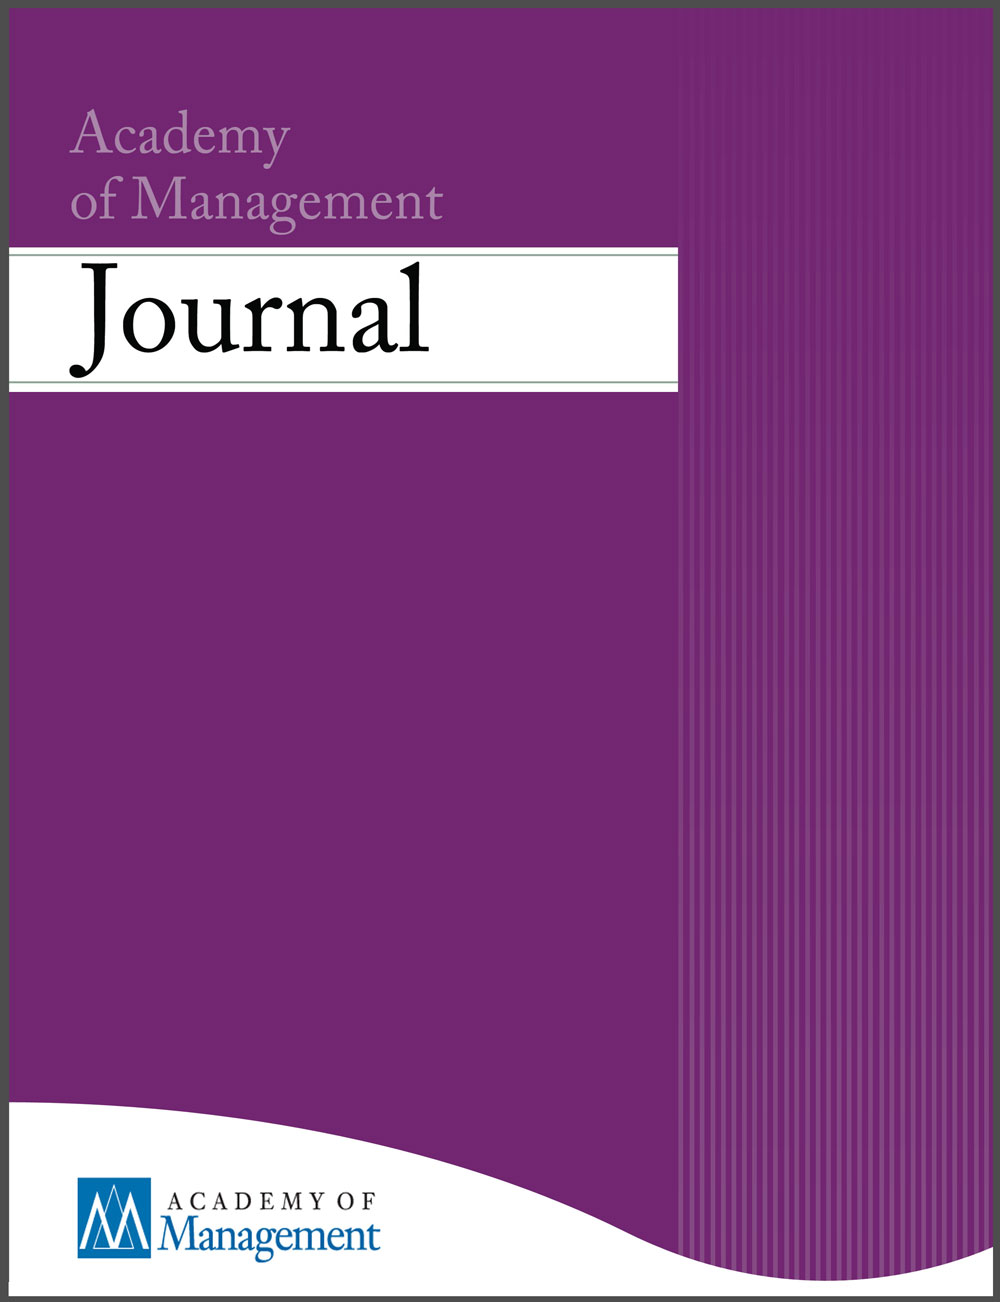 New Academy of Management Journal on Knowledge Disruptions and Uncertainty